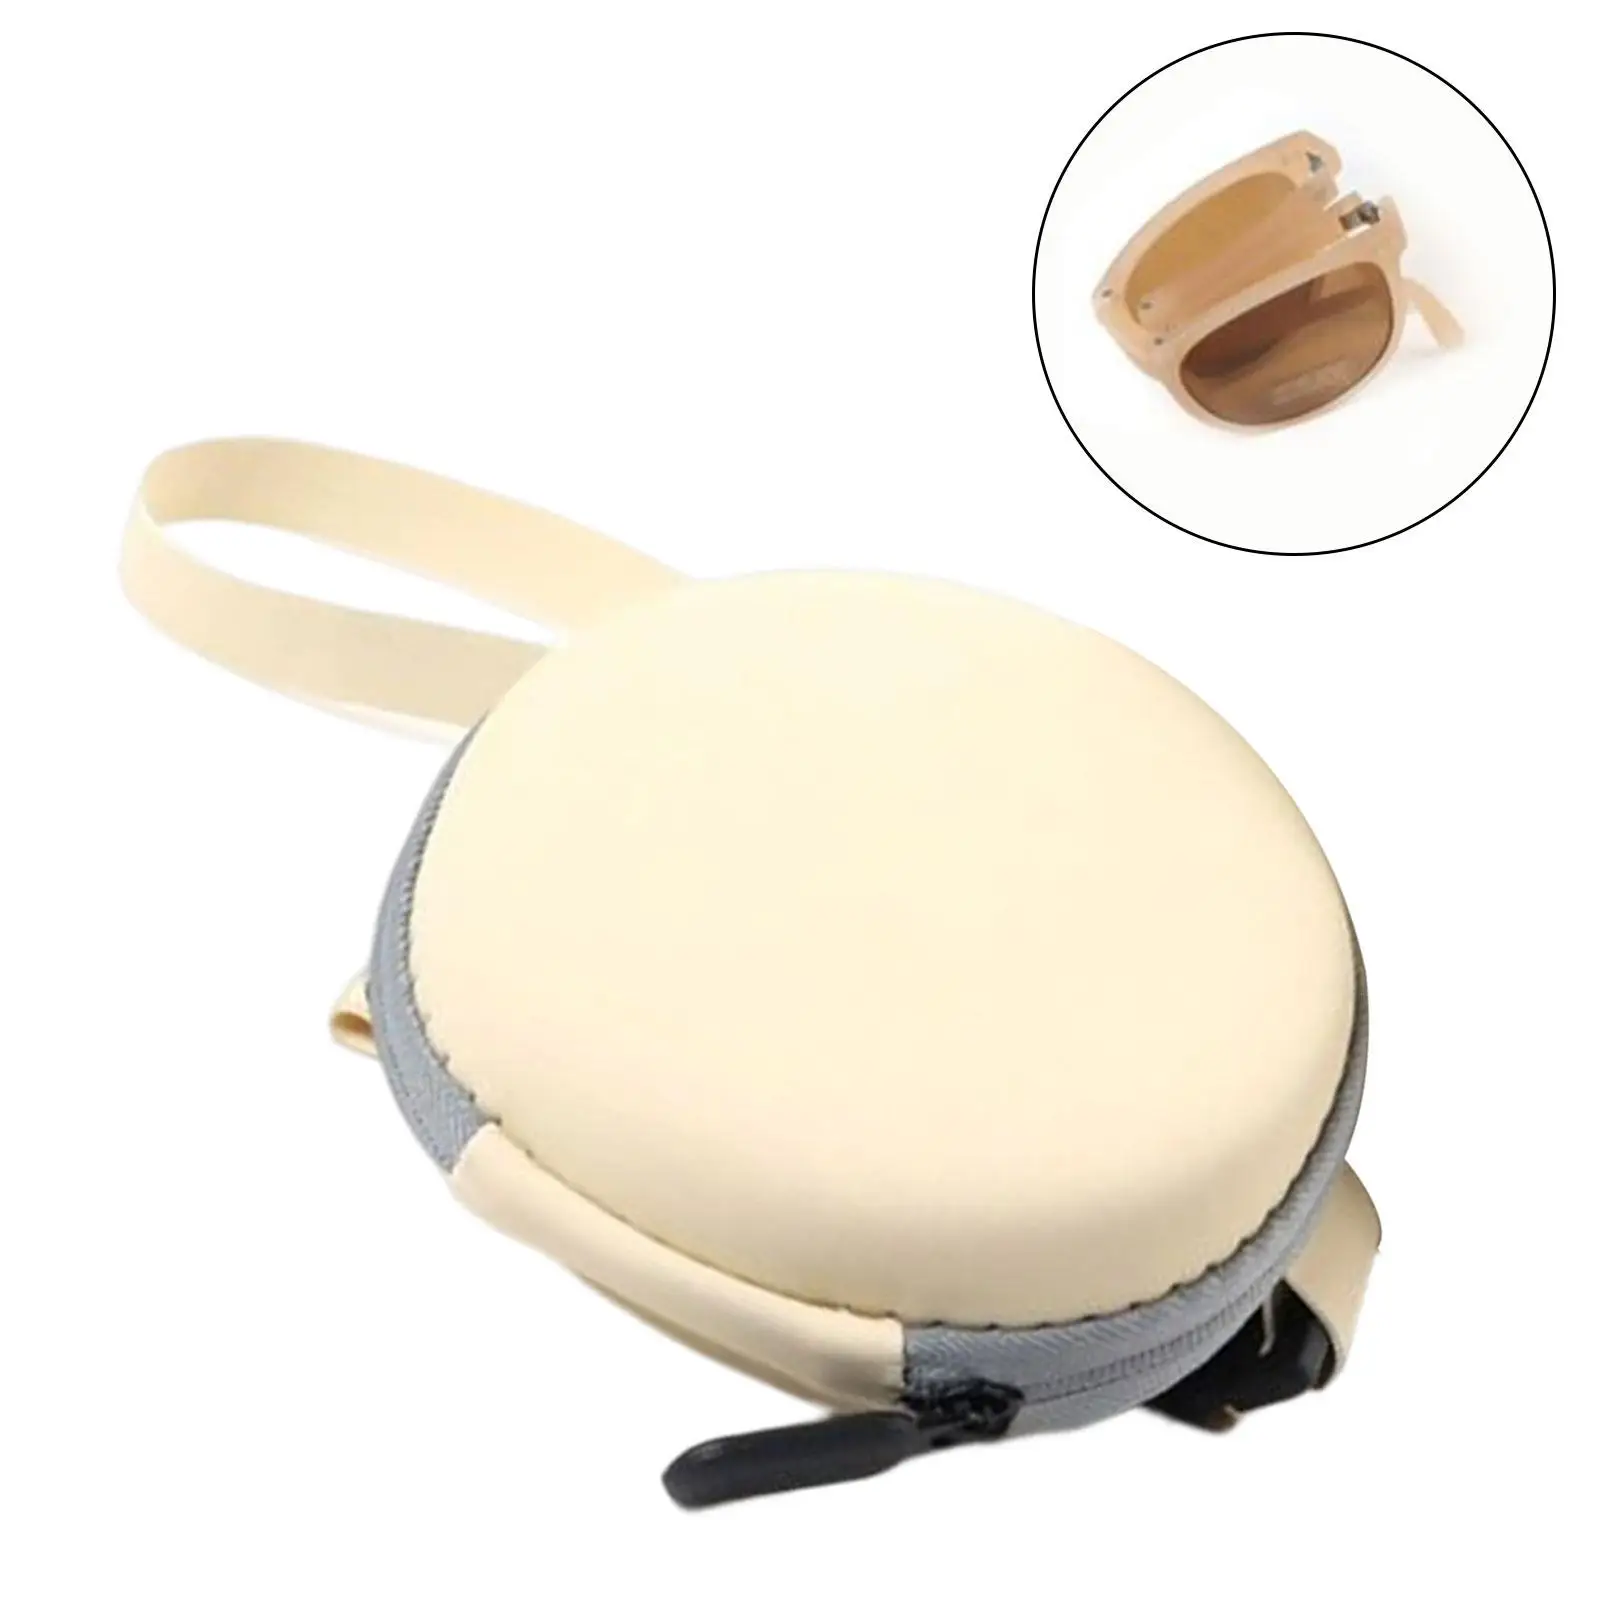 Glasses Case Small Portable with Wrist Strap Storage Box Eyeglasses Case Protective Case for Foldable Sunglasses Eyewear Travel